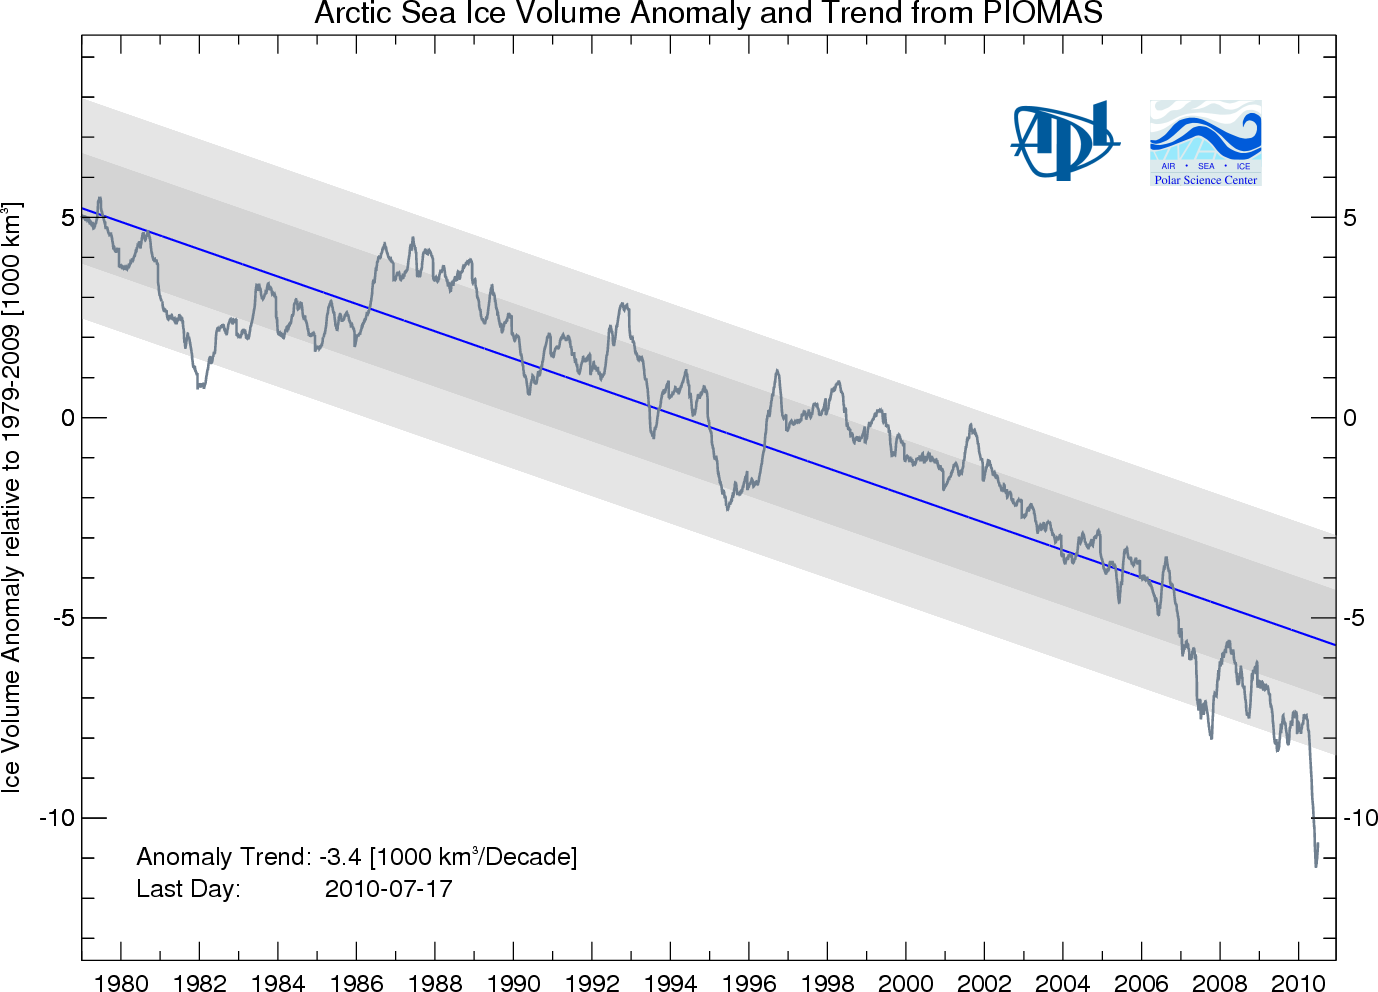 Arctic Sea Ice Volume and Trend from PIOMAS